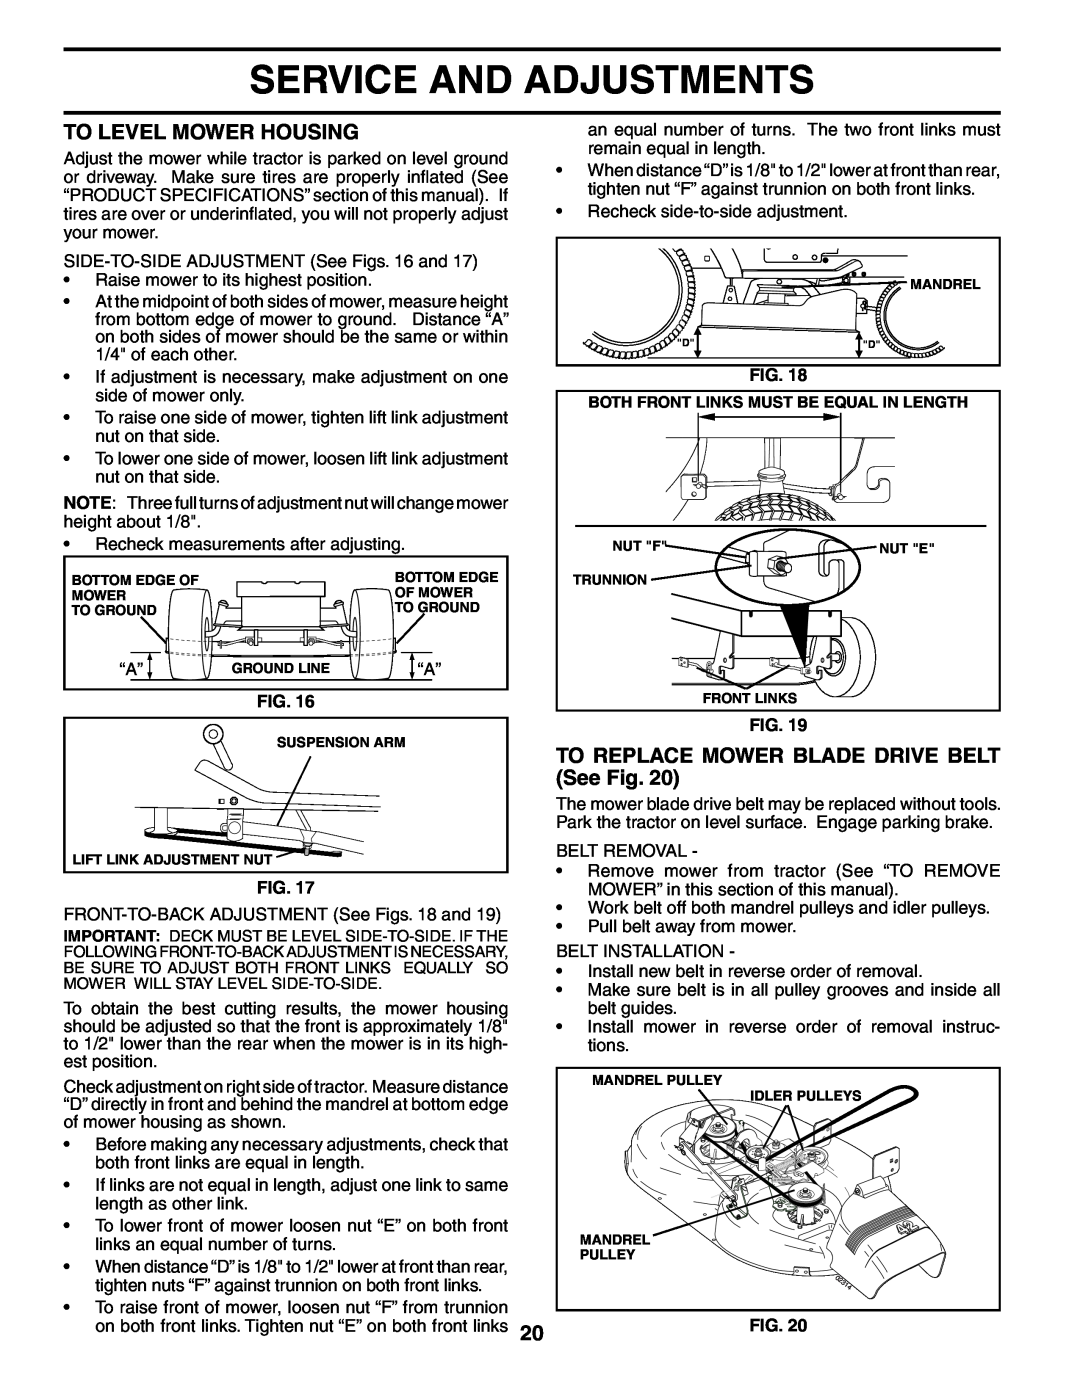 Poulan 196085 manual To Level Mower Housing, TO REPLACE MOWER BLADE DRIVE BELT See Fig, Service And Adjustments 